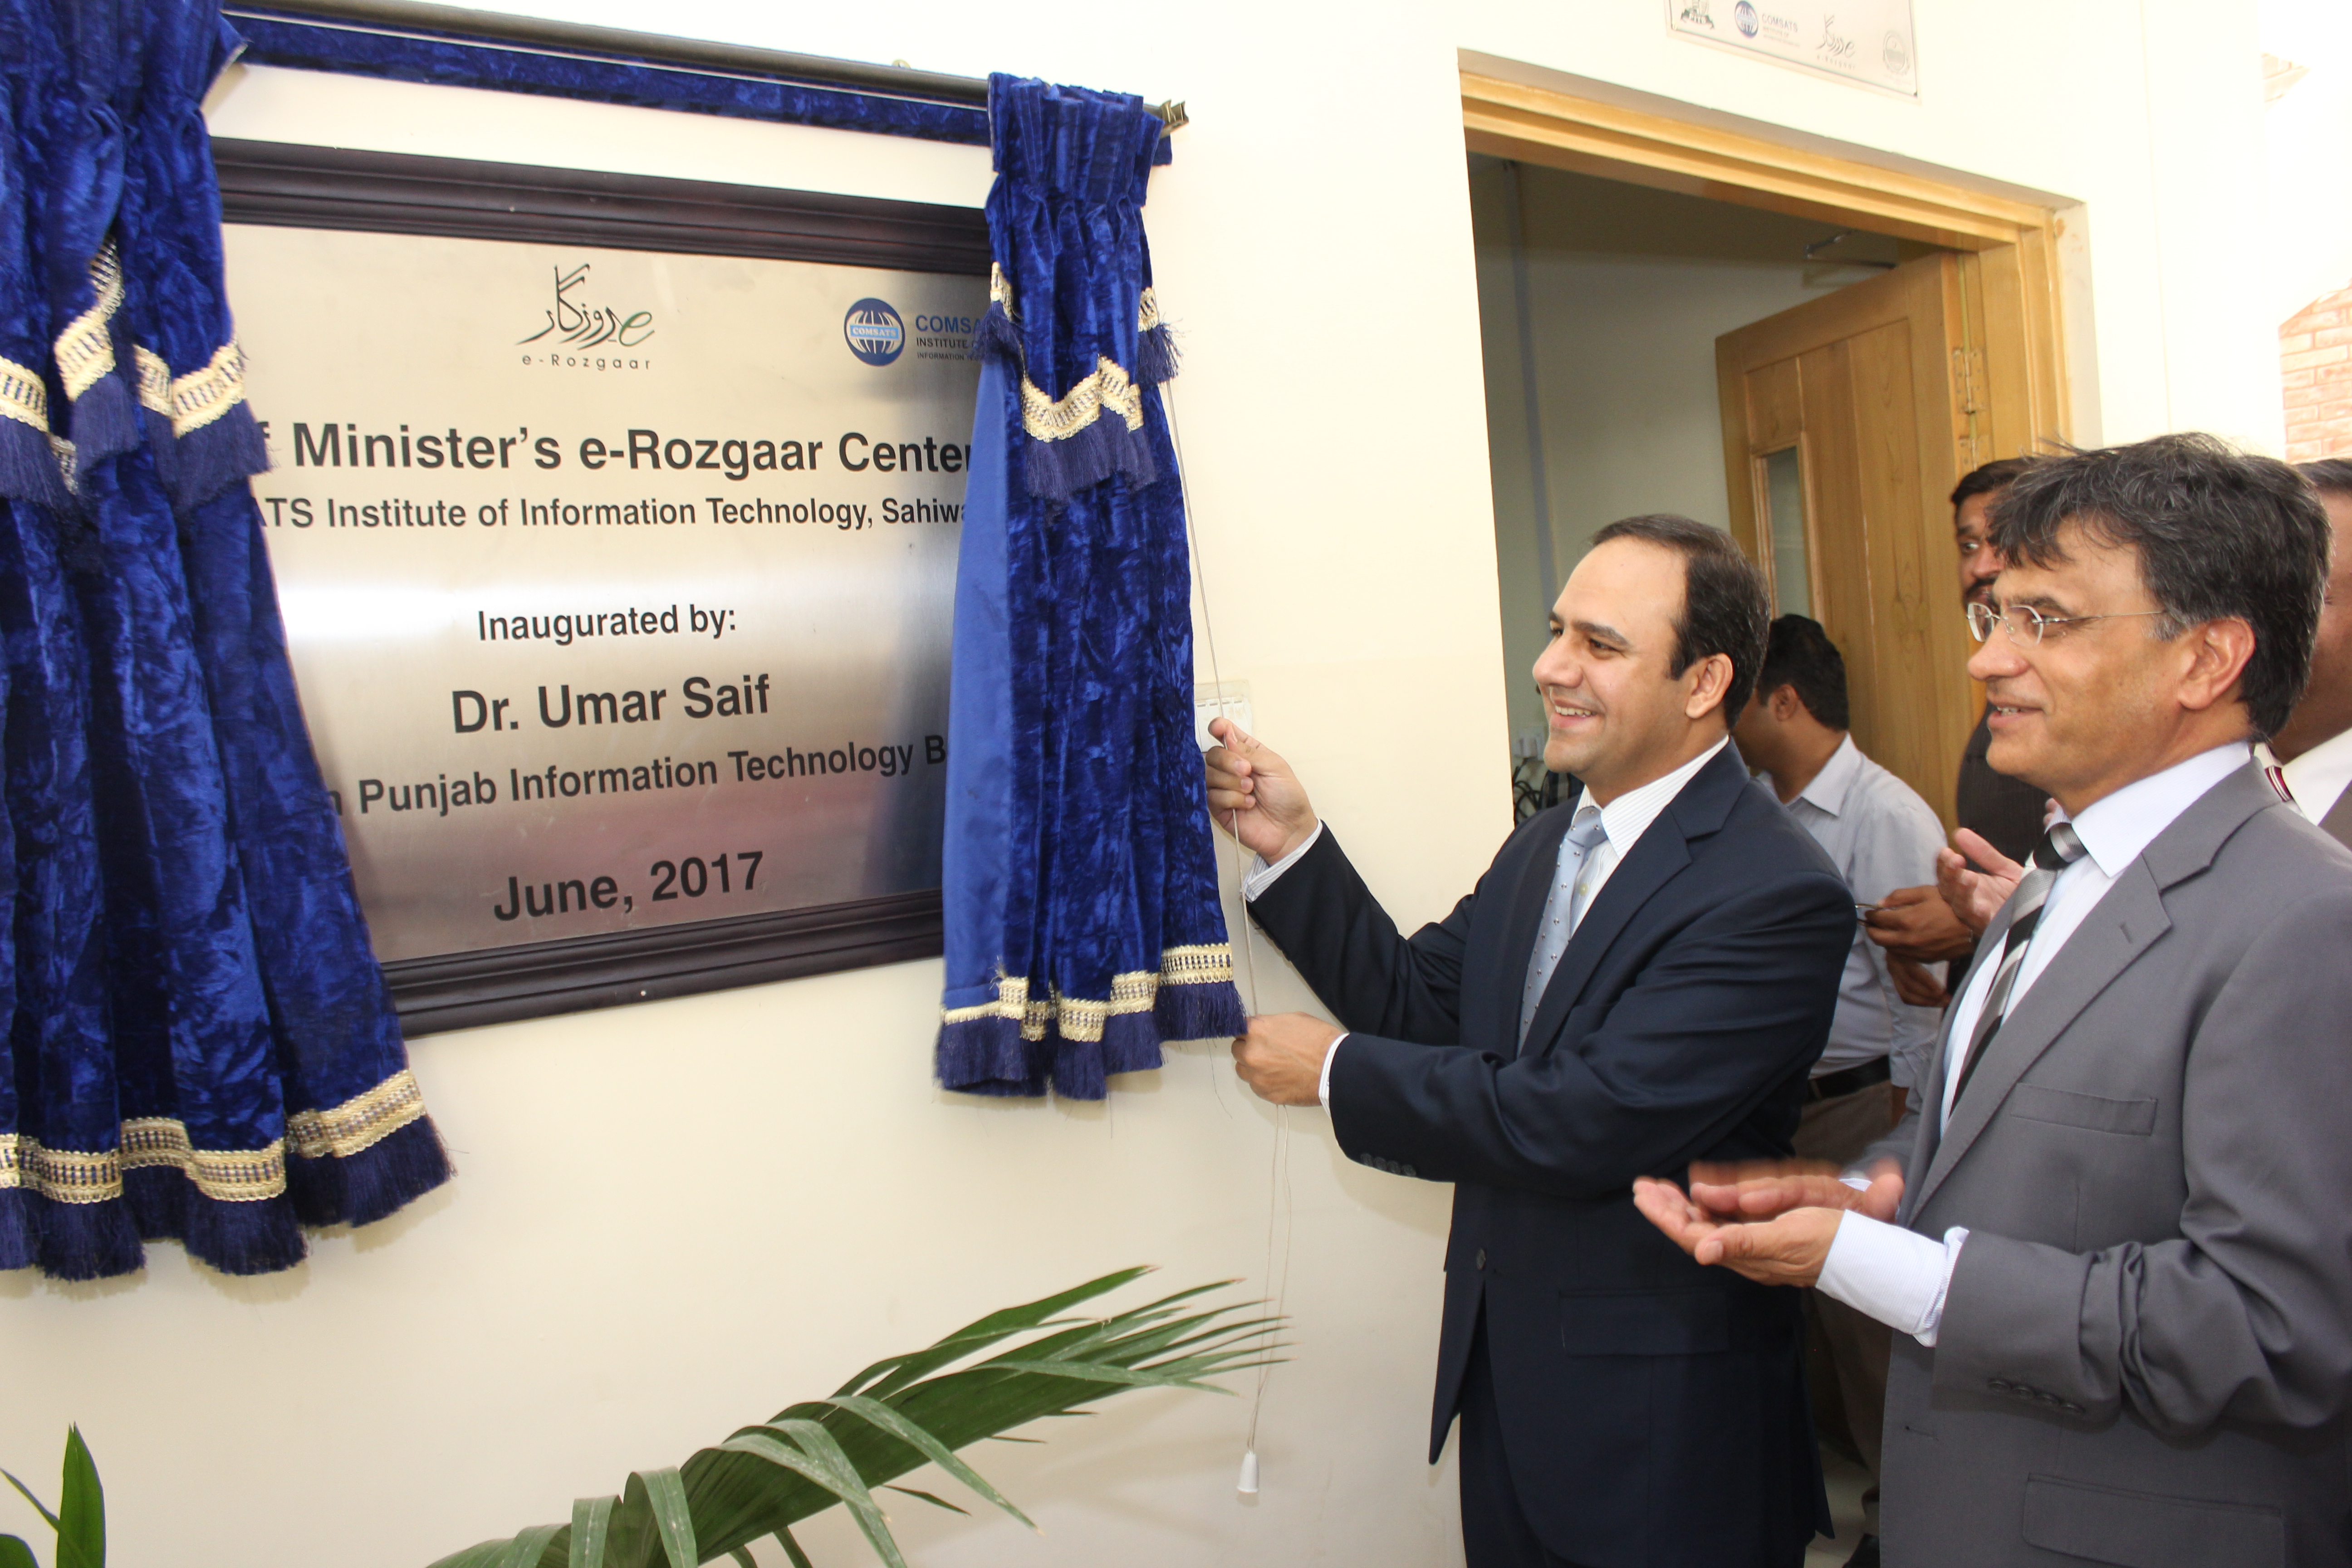 Fifth (5th) e-Rozgaar Center has been launched at COMSATS Sahiwal.